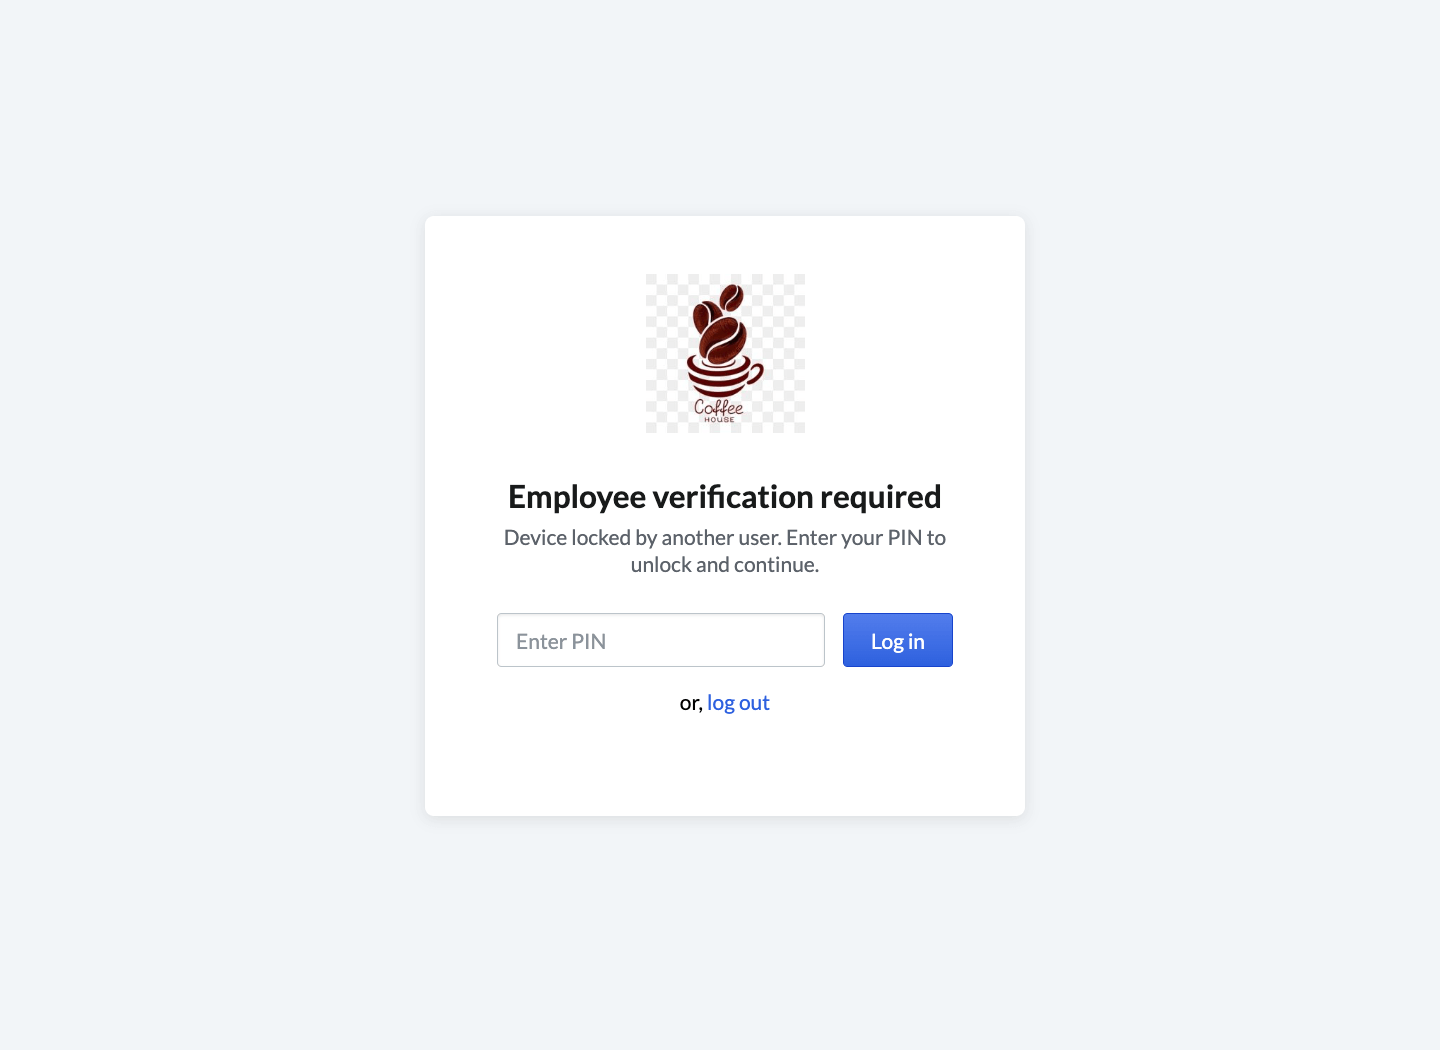 Verification required page requesting employee PIN.